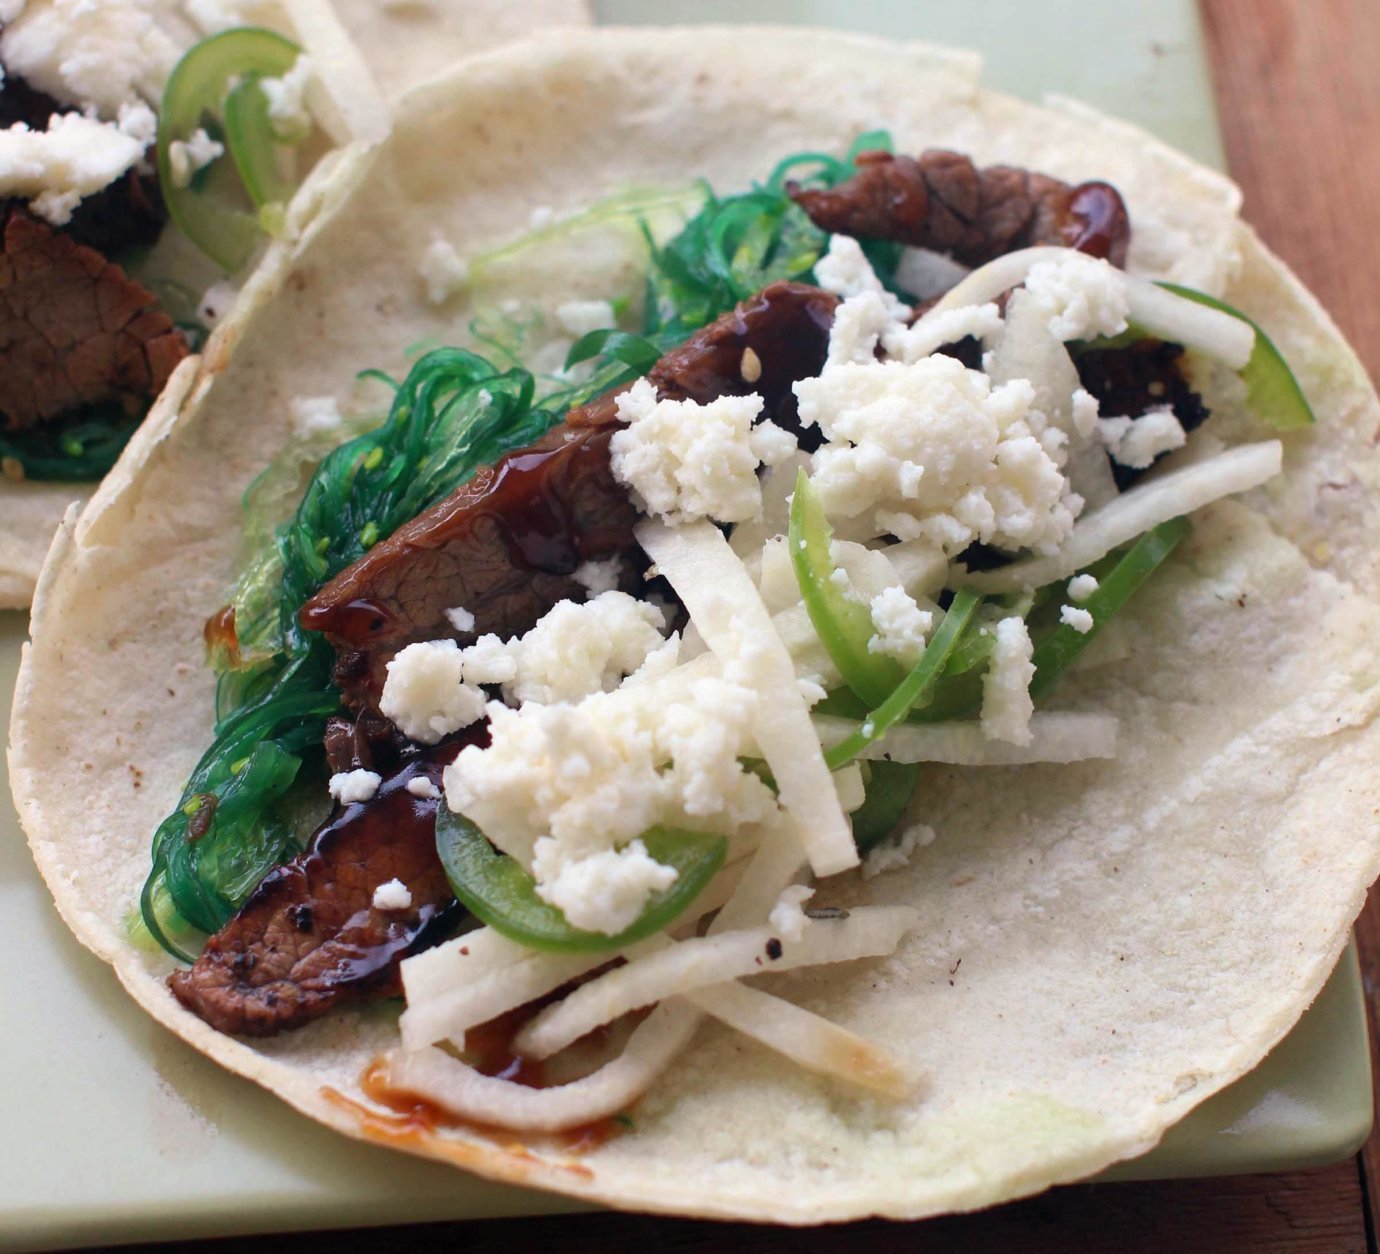 This July 27, 2015 photo shows beefy seaweed tacos with jalapeno jicama slaw in Concord, N.H. This dish is from a recipe by J.M. Hirsch. (AP Photo/Matthew Mead)